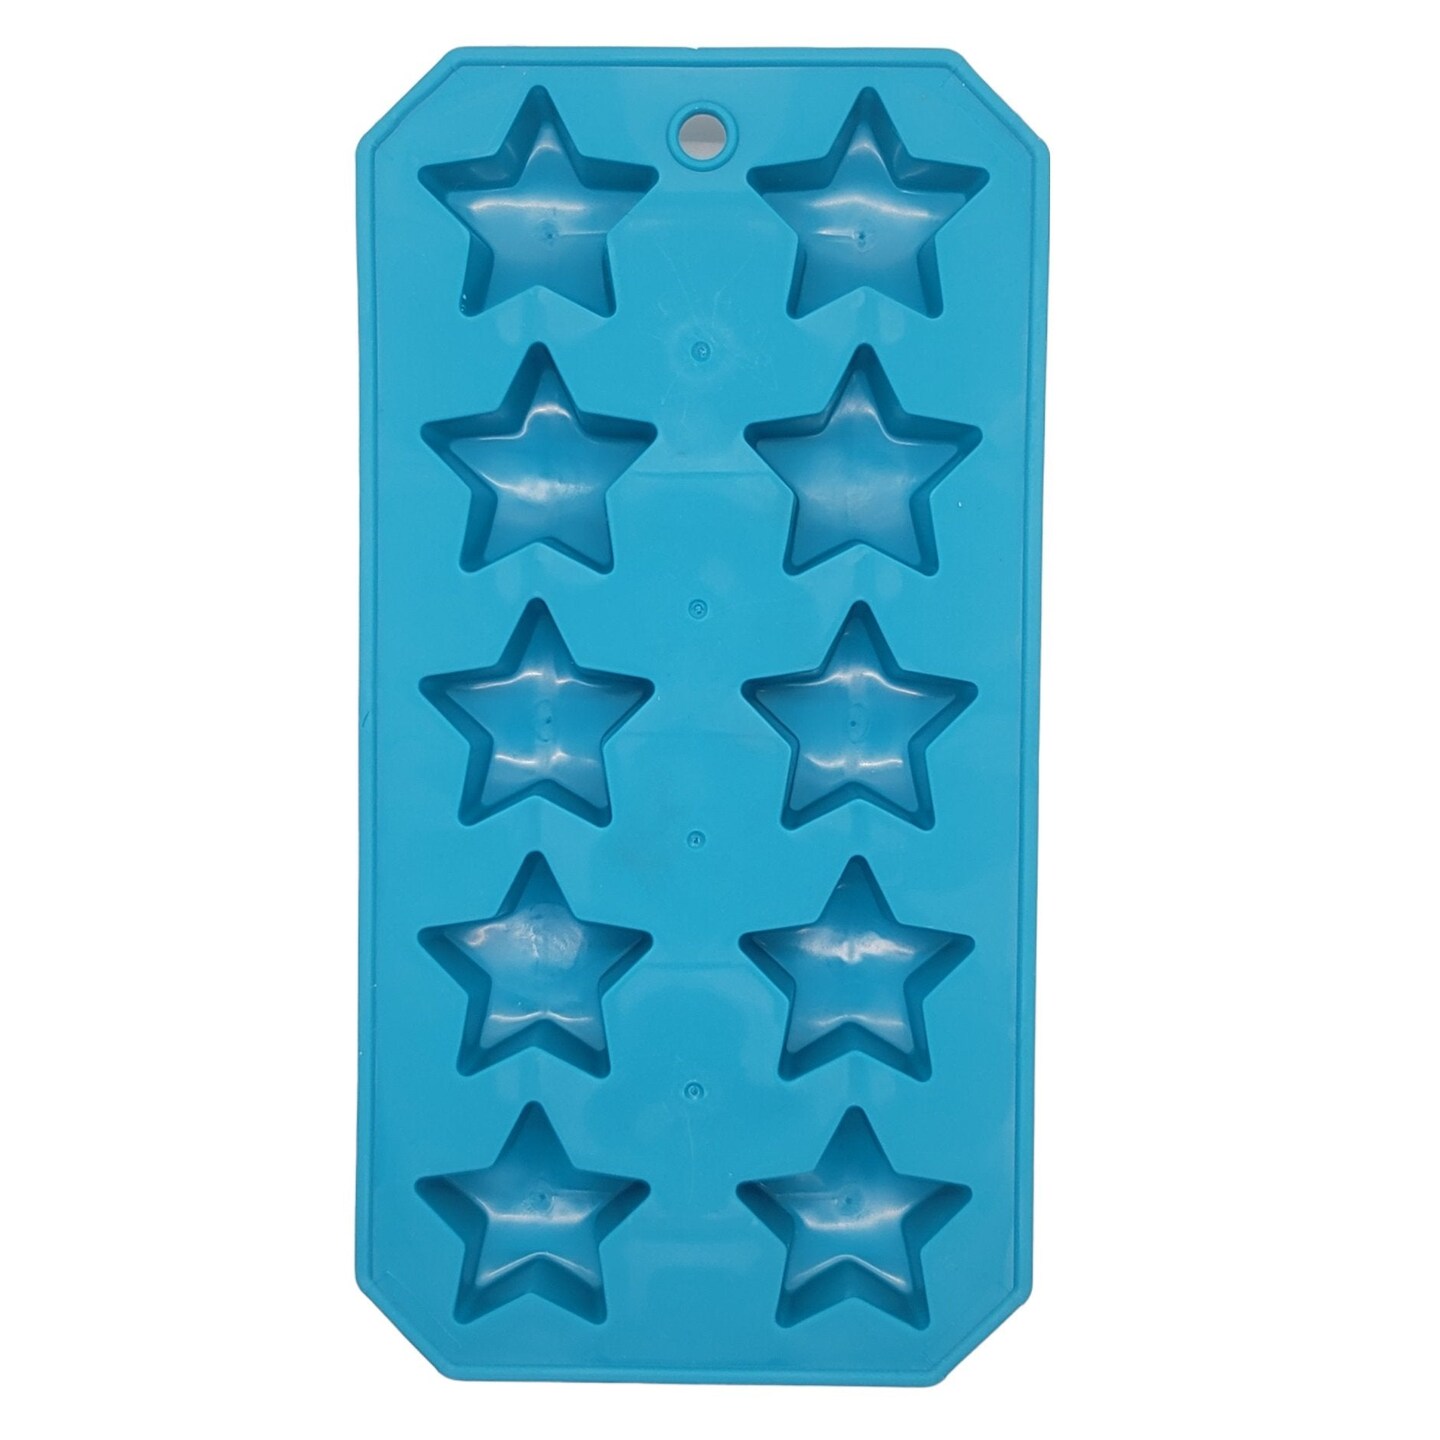 Chef Craft Flexible Thermoplastic 10-Cube Ice Cube Tray - Star